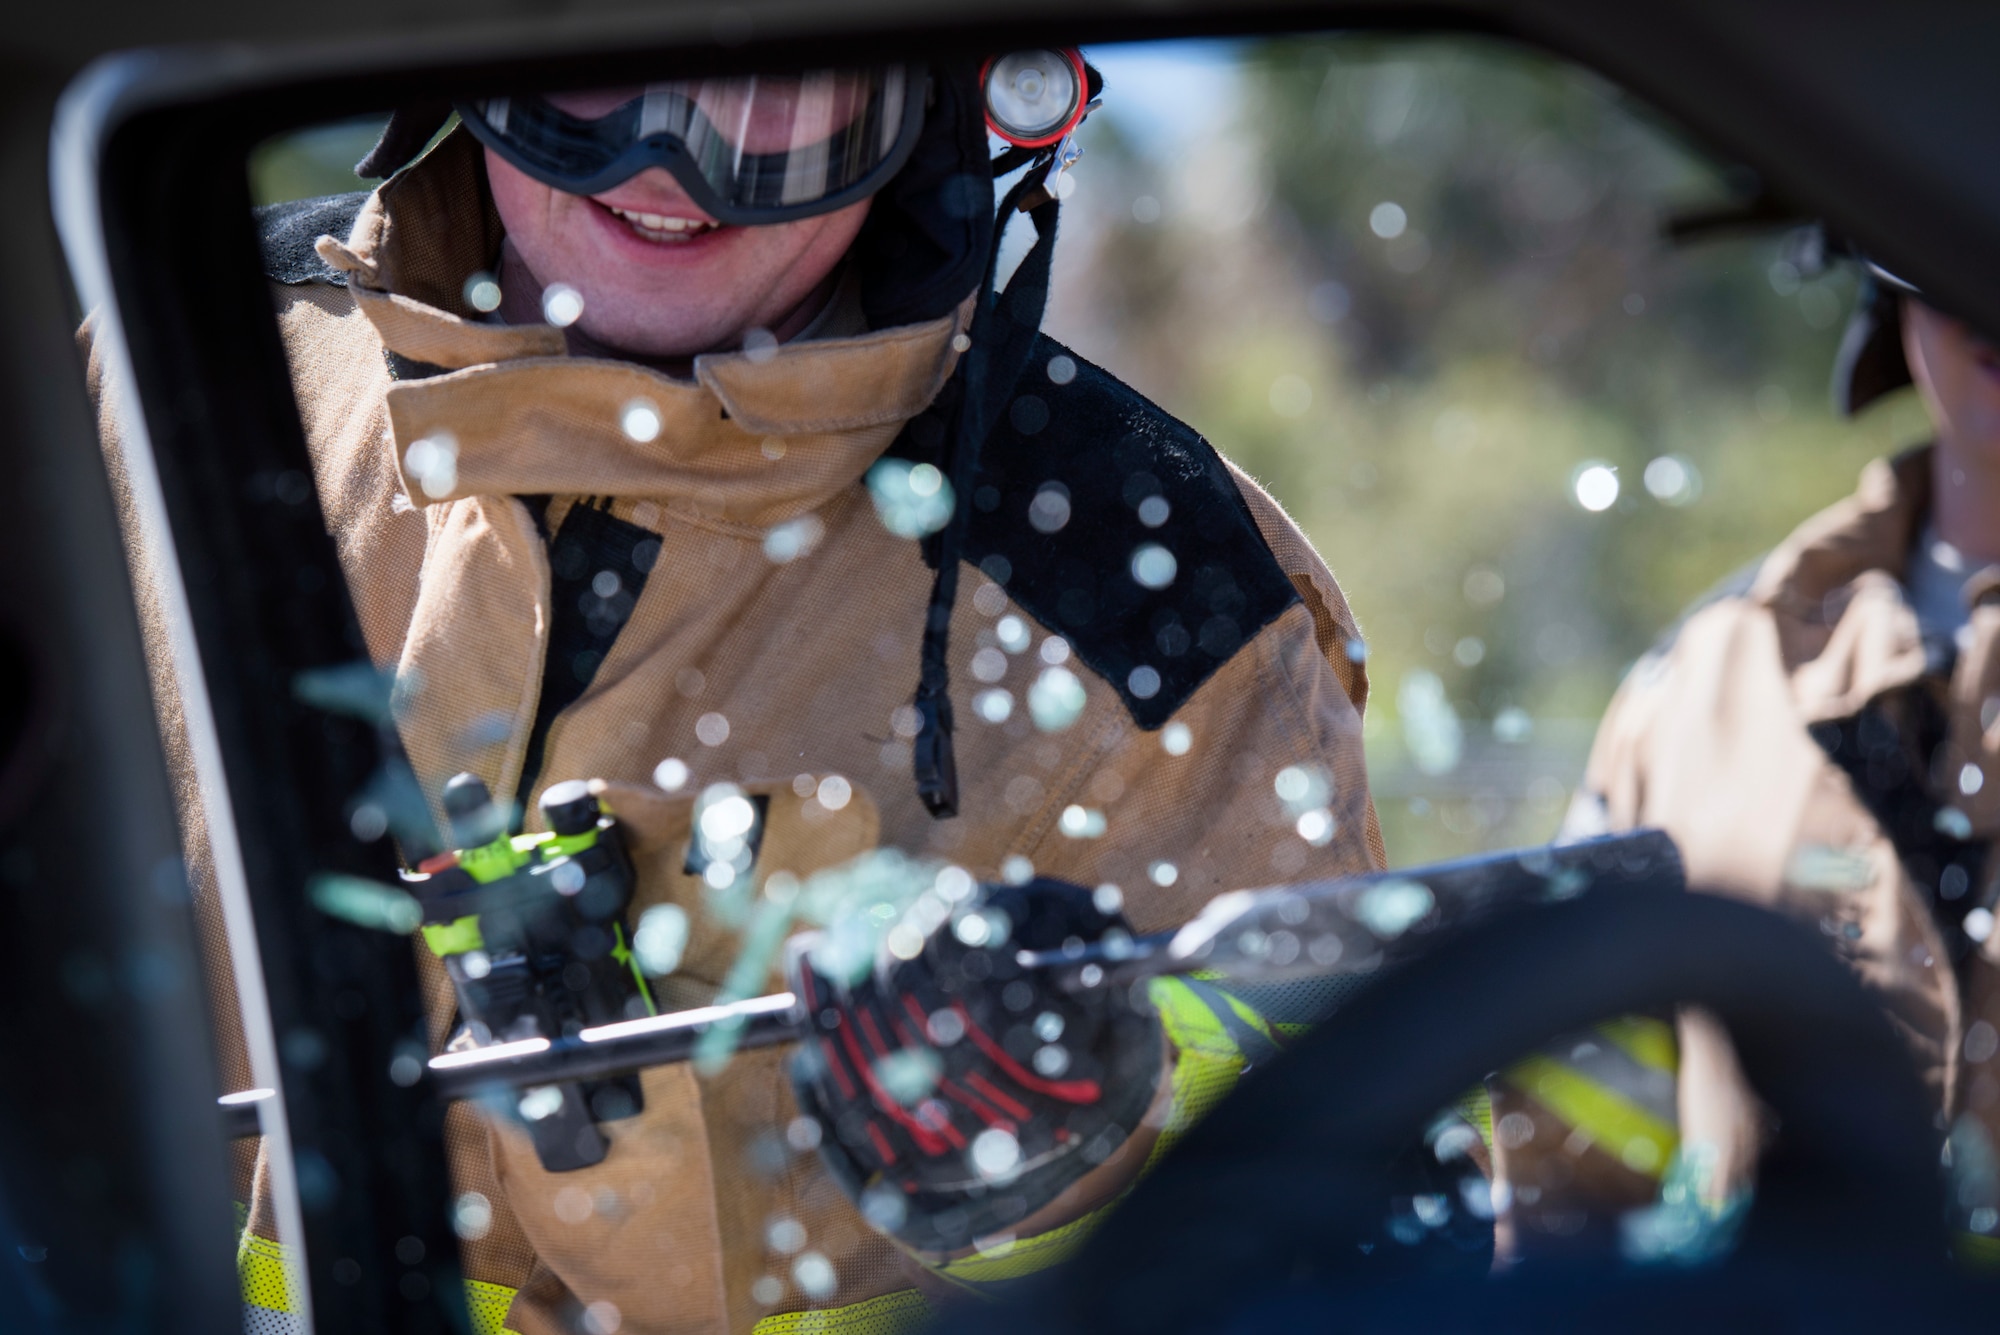 A 6th Civil Engineer Squadron firefighter breaks a car window during a joint firefighting training exercise at MacDill Air Force Base, Fla., March 6, 2019.